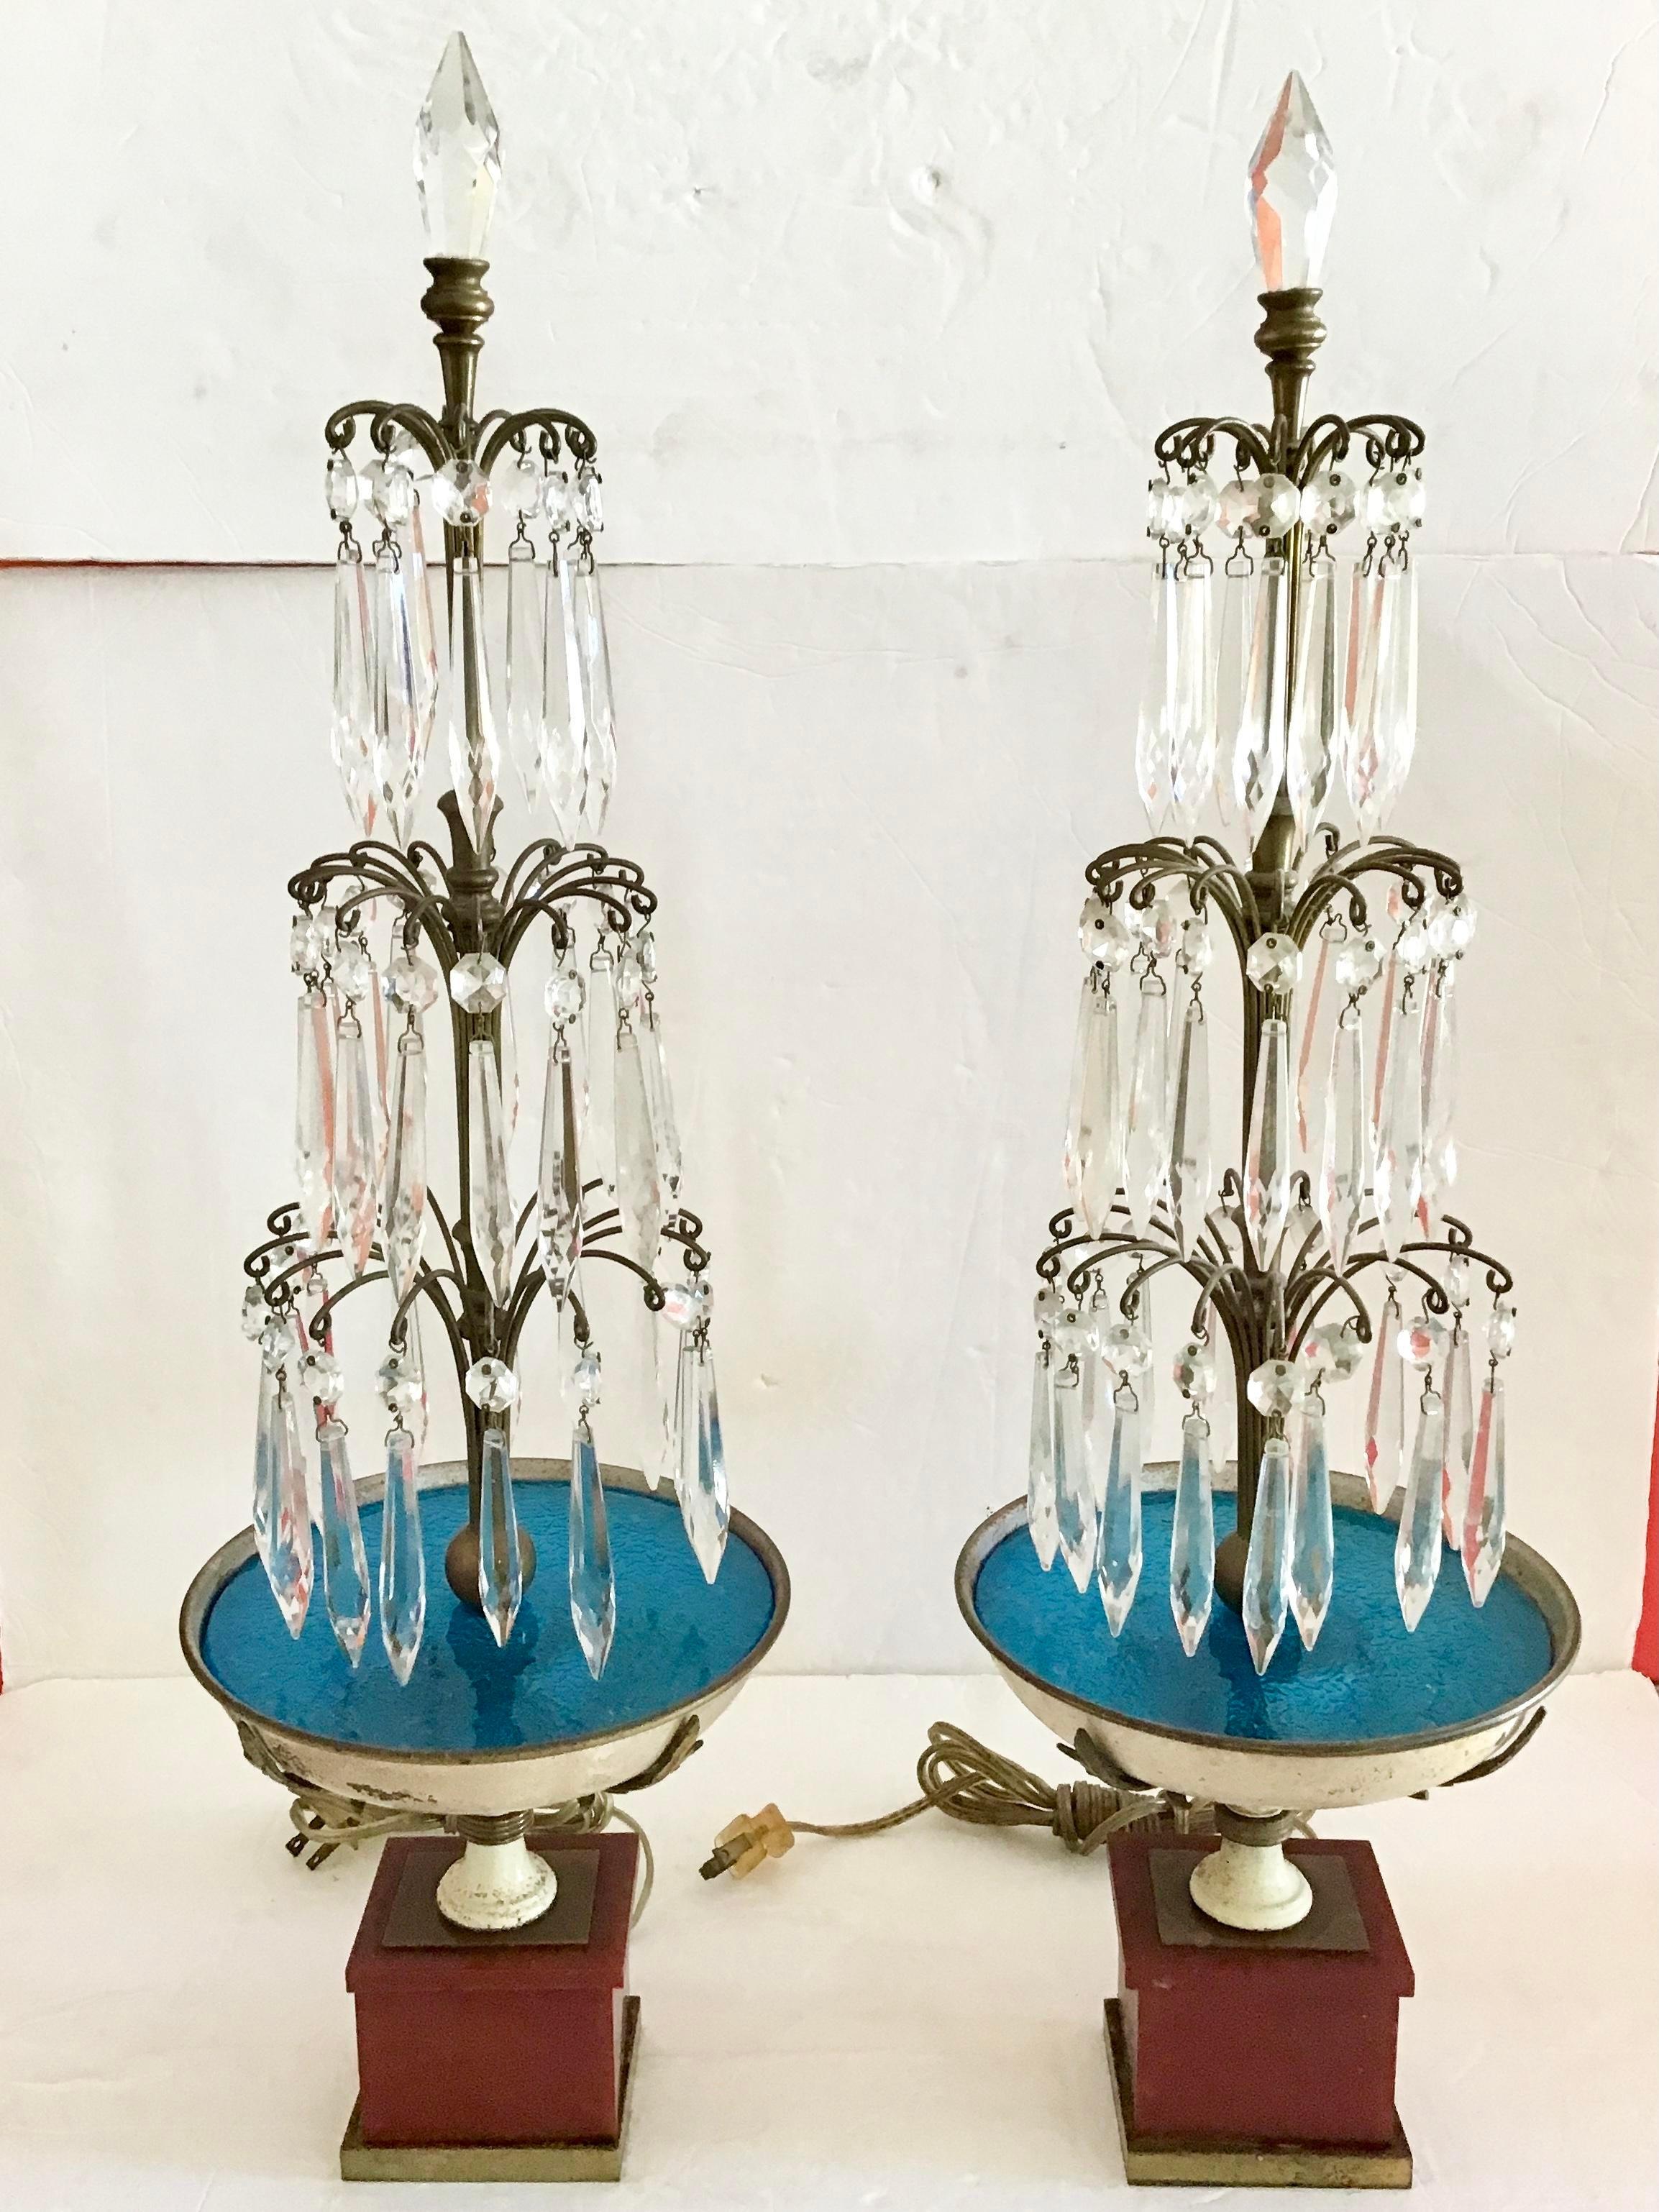 Very elegant pair of Jansen chandelier table lamps with crystals, metal, and turquoise glass. Base is wood pedestal. Great details in their design. Would be a nice addition to your interiors, would look great in a living or dining room.